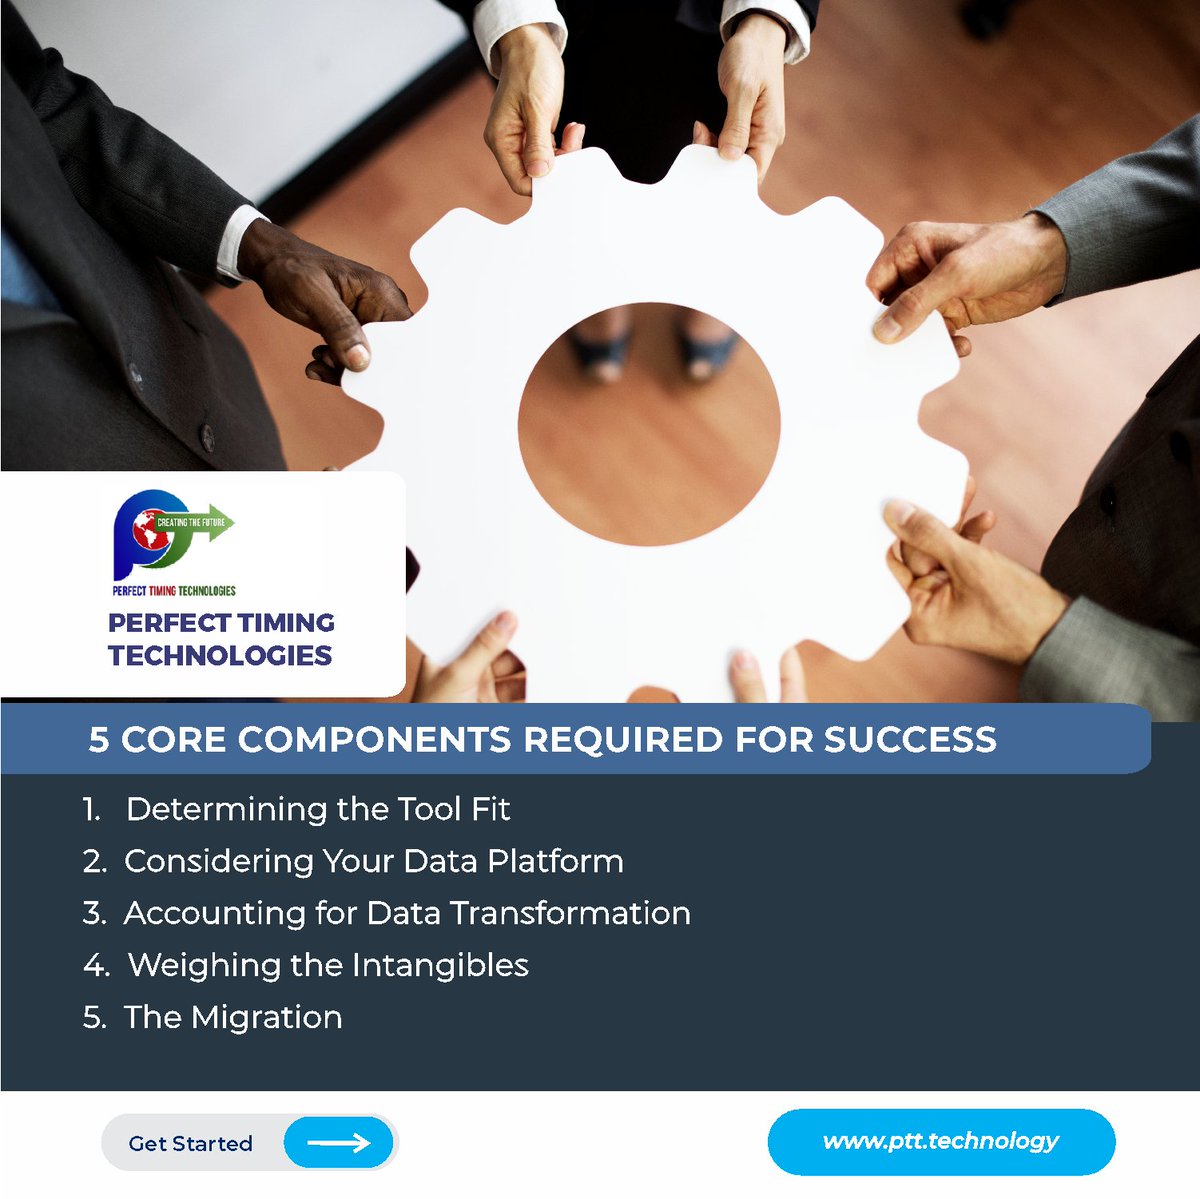 5 Core Components Required for Success

Read here: analytics8.com/blog/bi-and-an… 

#BIandAnalytics #SuccessFactors #AnalyticsTools #TechInnovation #BISelection #AnalyticsSuccess #TechBlog #BusinessIntelligence #DataAnalysis #TechFrameworks #PerfectTimingTechnology #PerfectTimingHolding